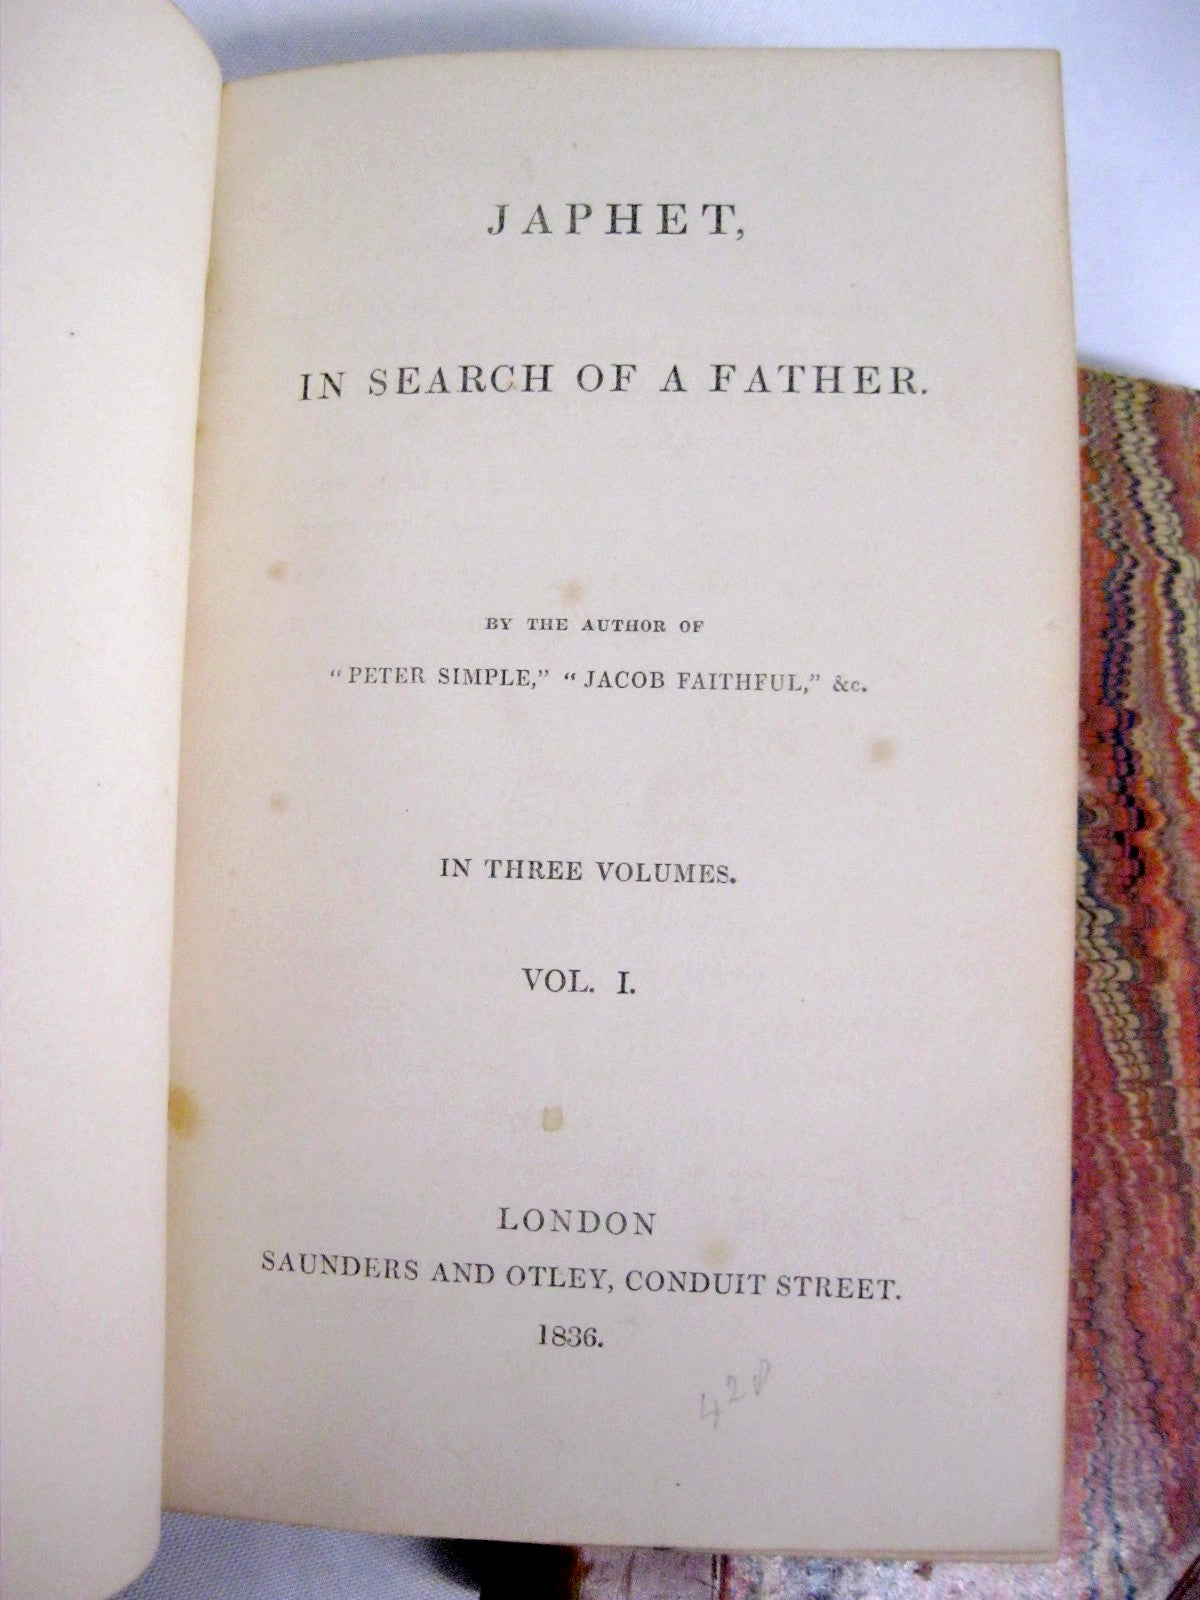 Japhet In Search Of A Father by Captain Frederick Marryat